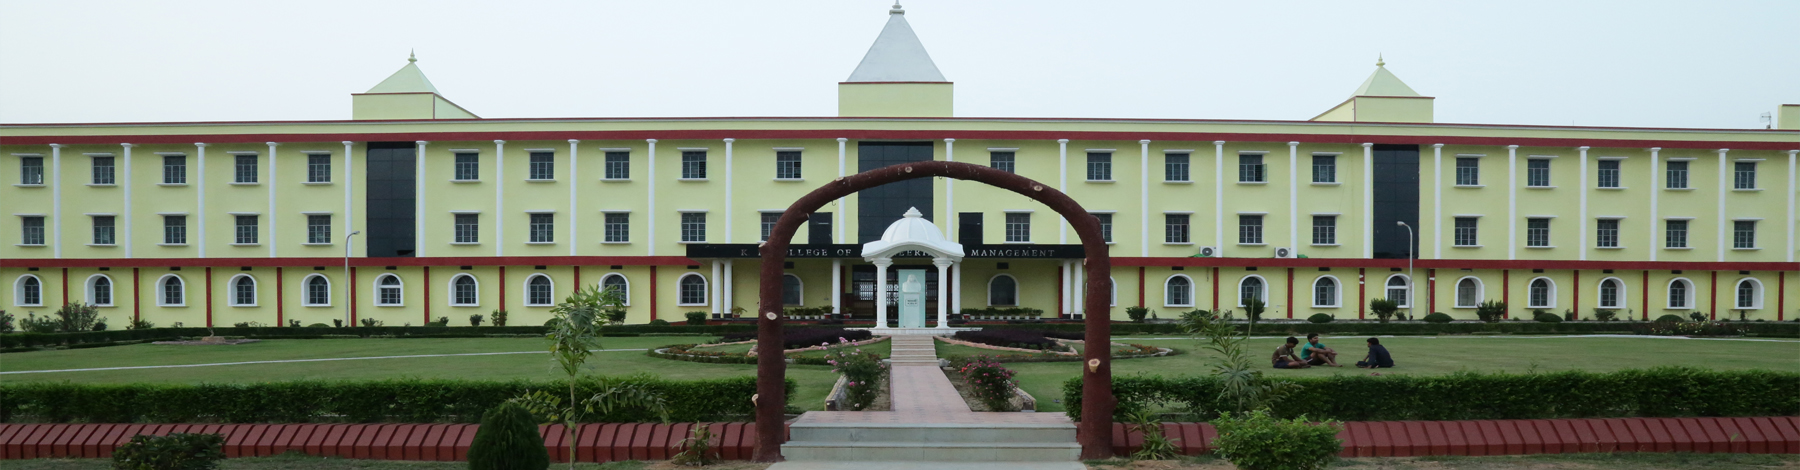 Kk College Of Engineering And Management Image